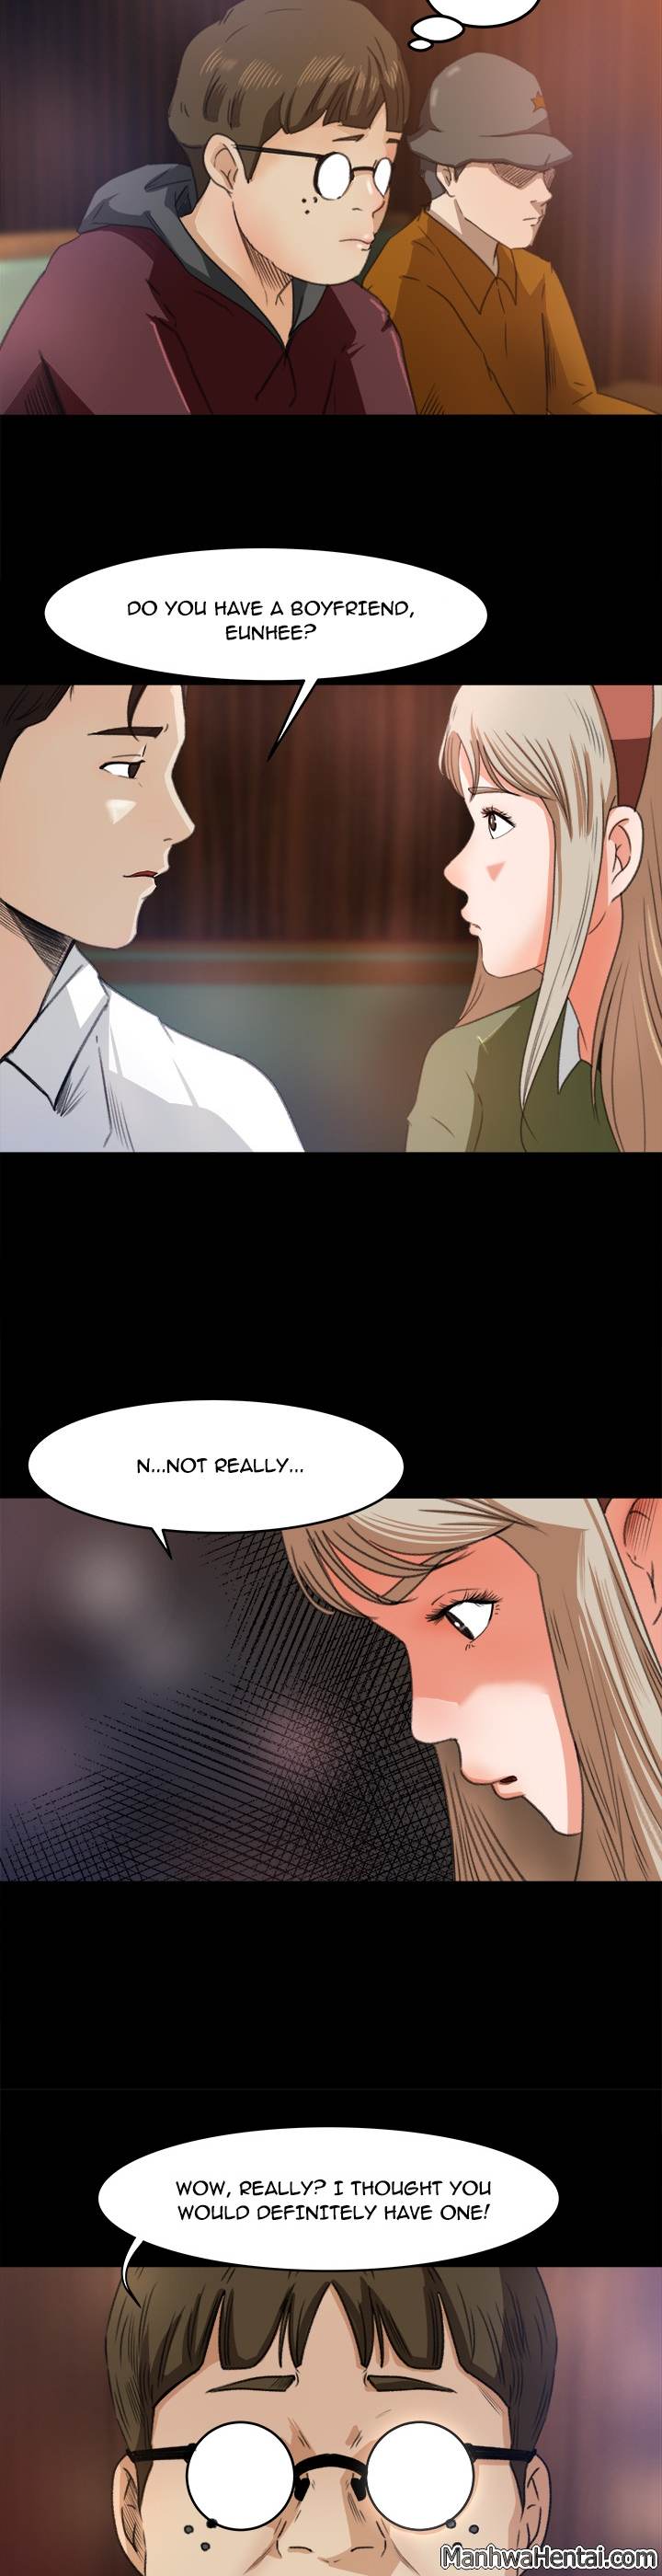 Inside the Uniform - Chapter 3 Page 19